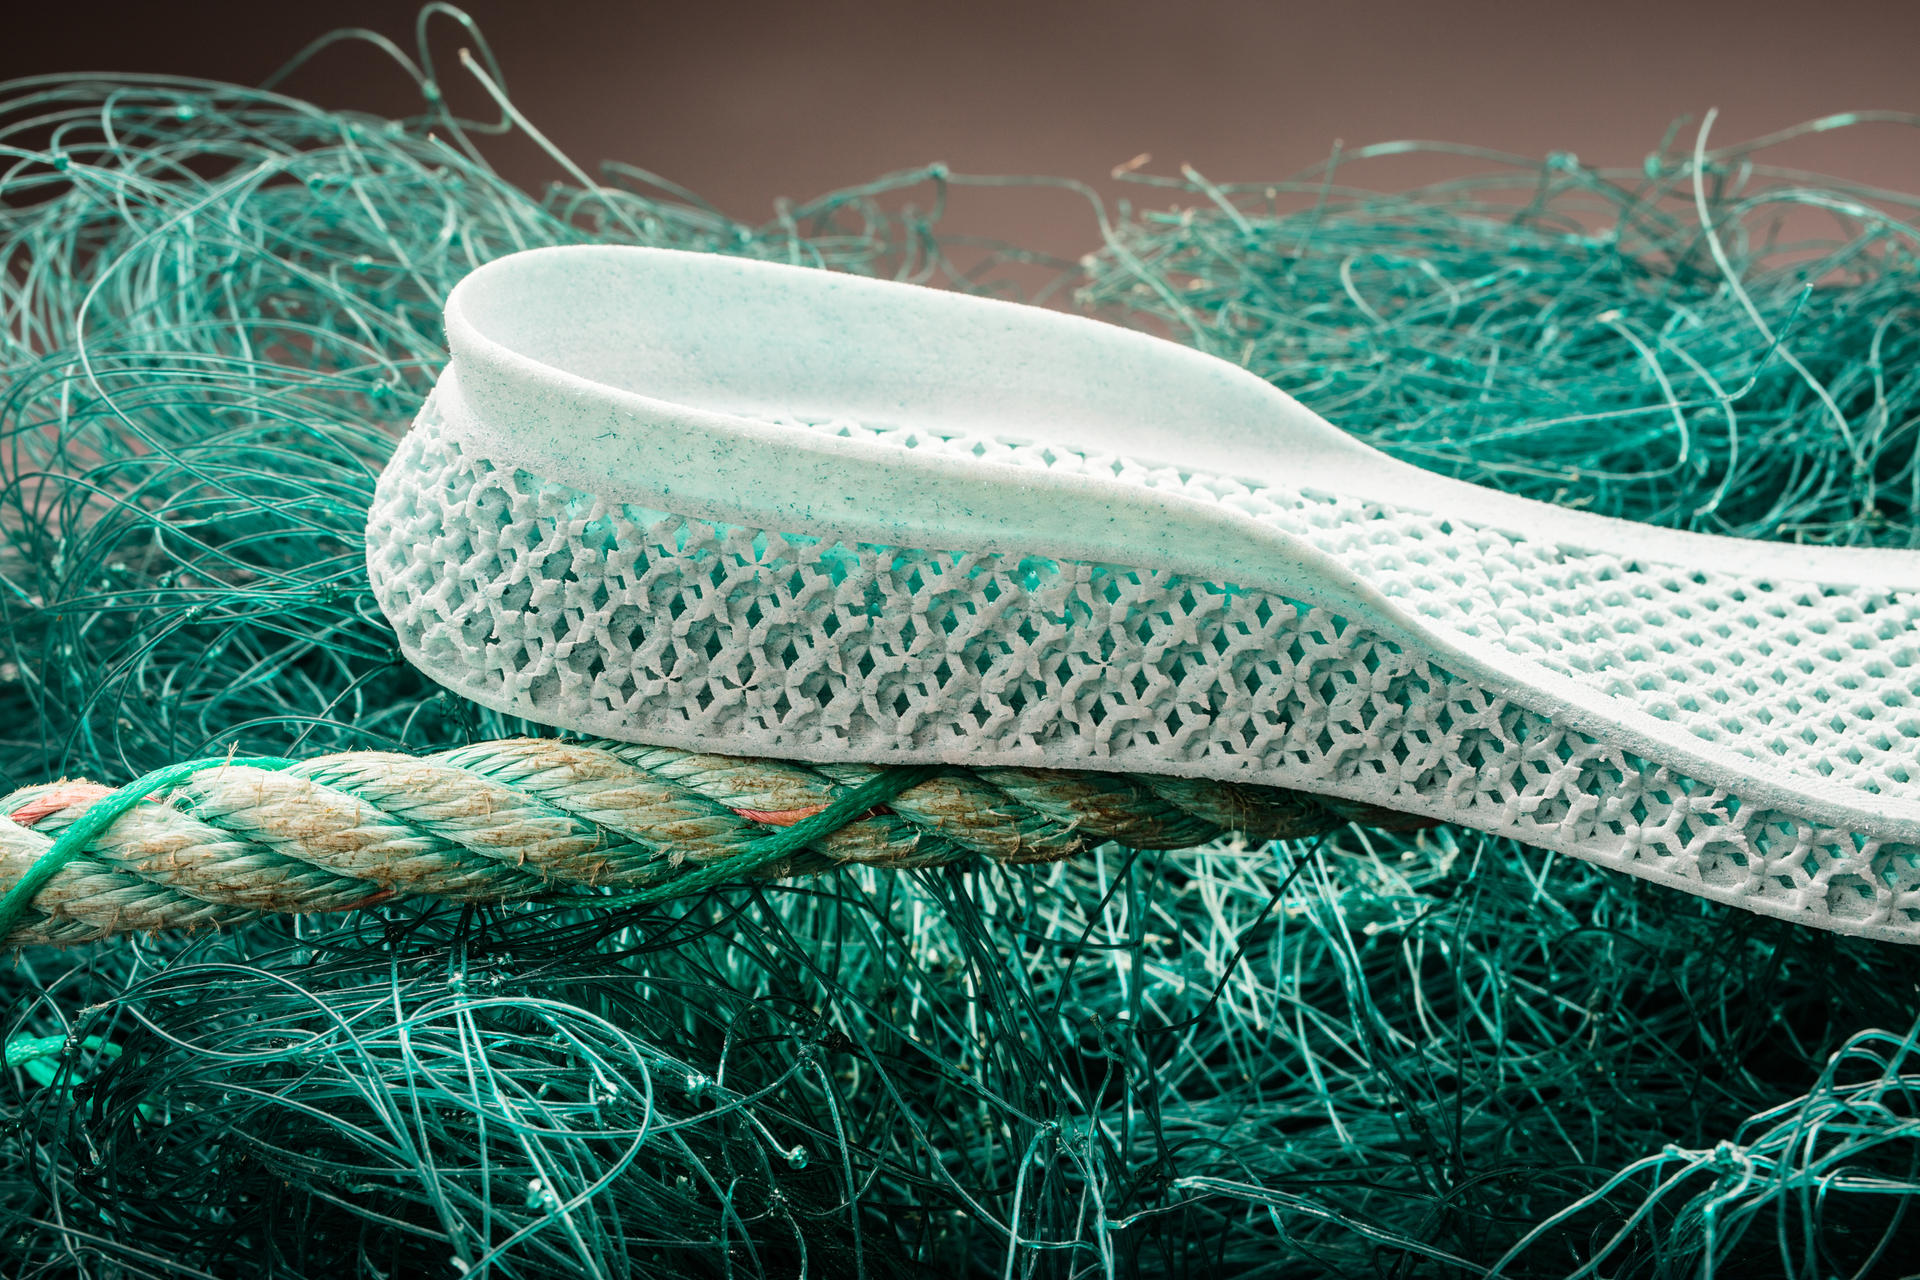 An Adidas Shoe made of Ocean Waste